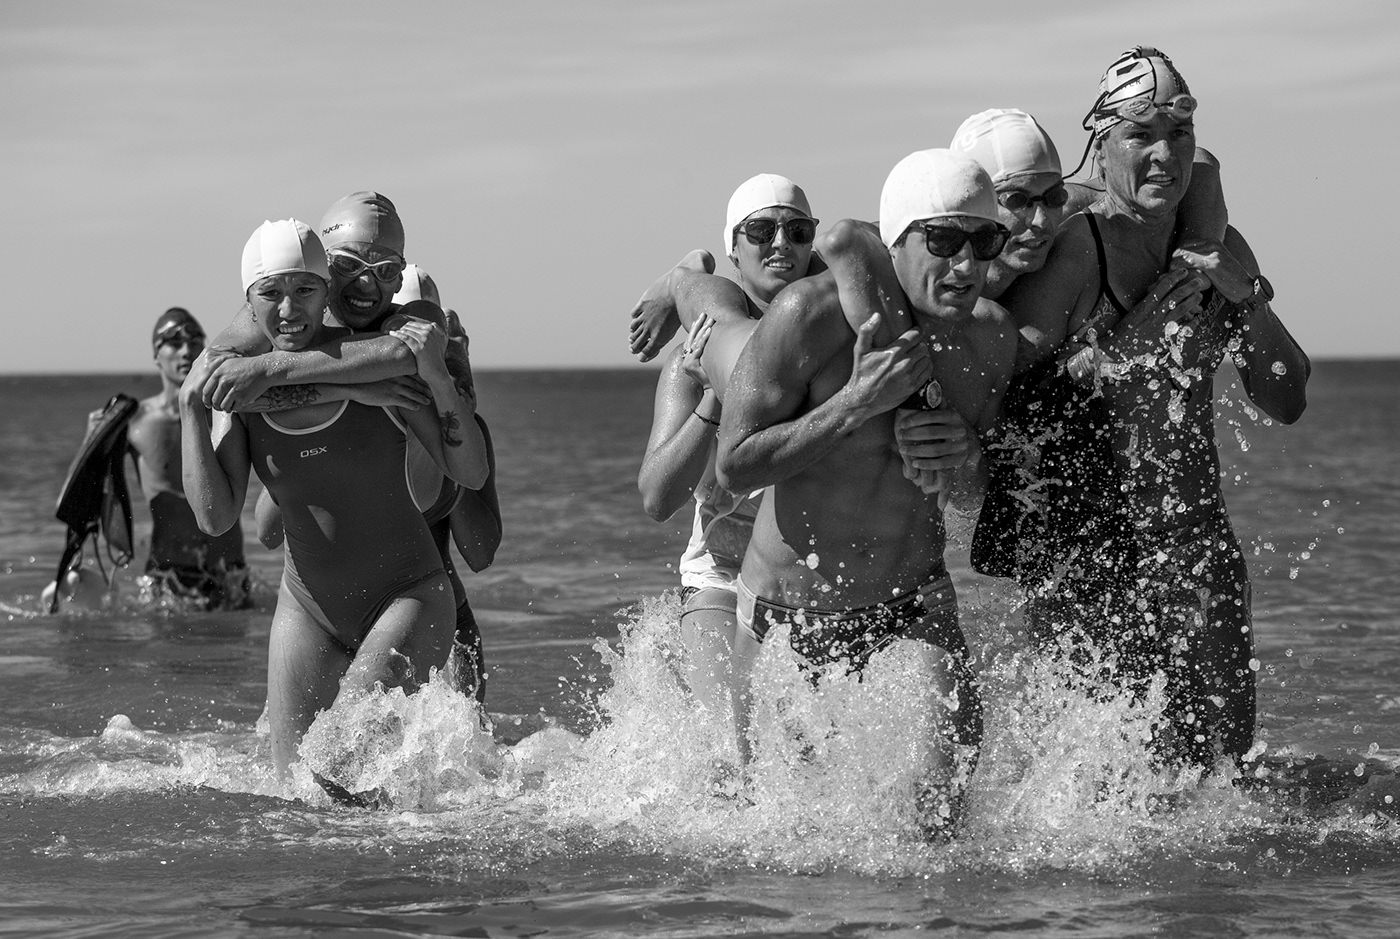 Outdoor swimming lifeguard Photography  Tournament sports black and white